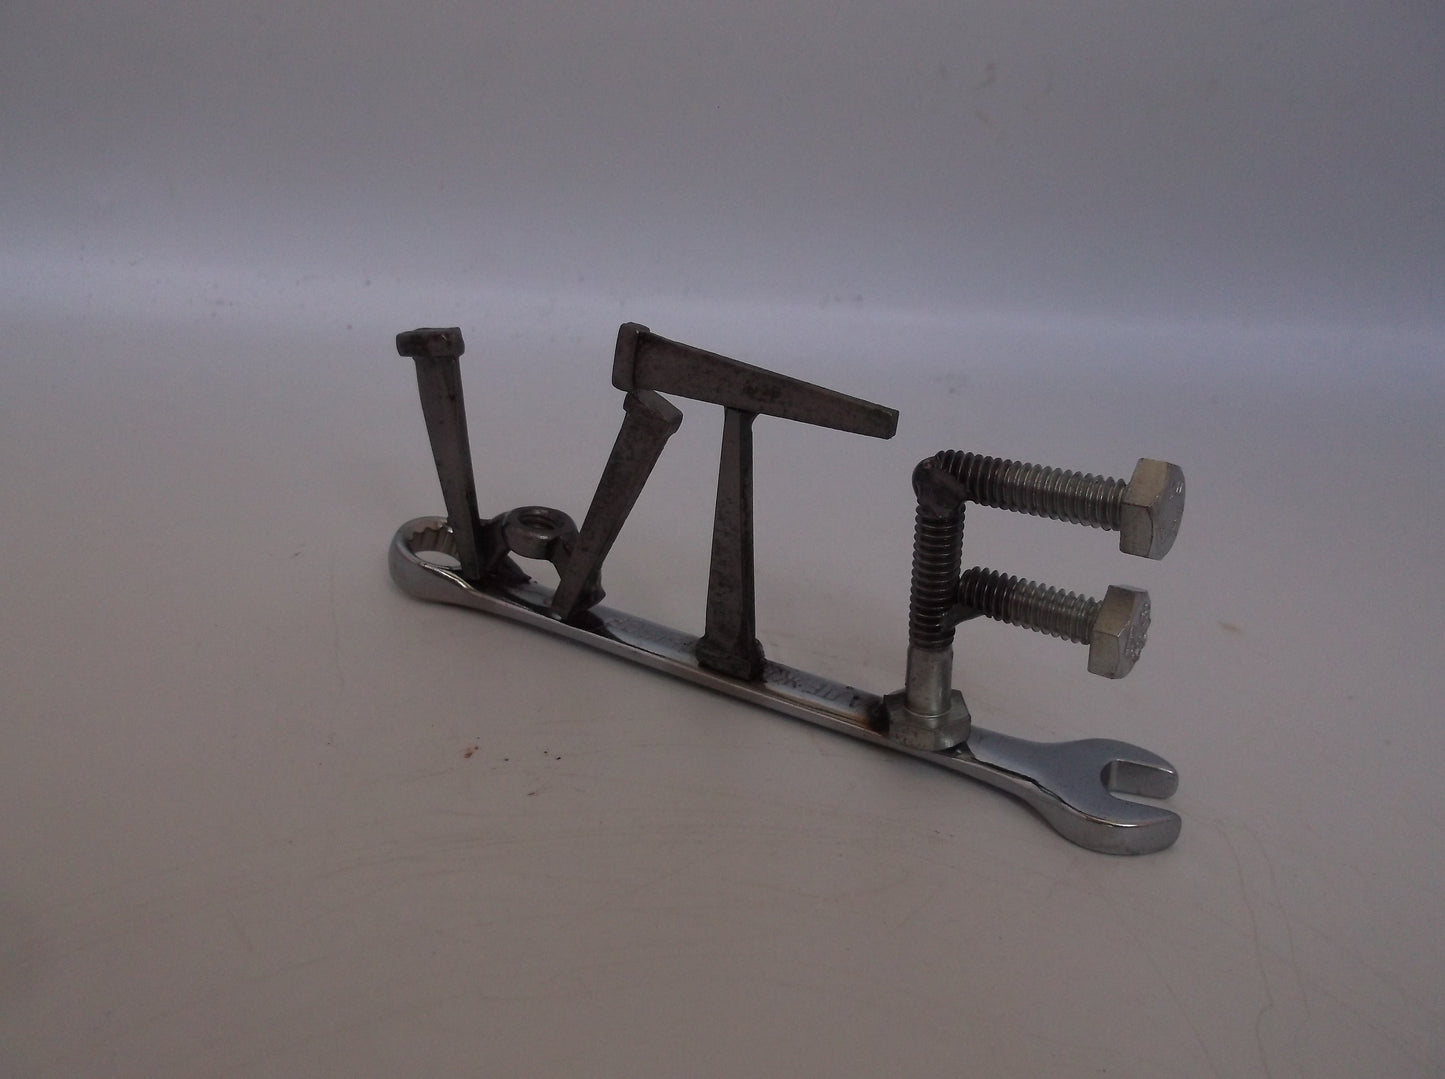 WTF, tiny wrench, miniature gift ideas, recycled, up cycled, welded metal art